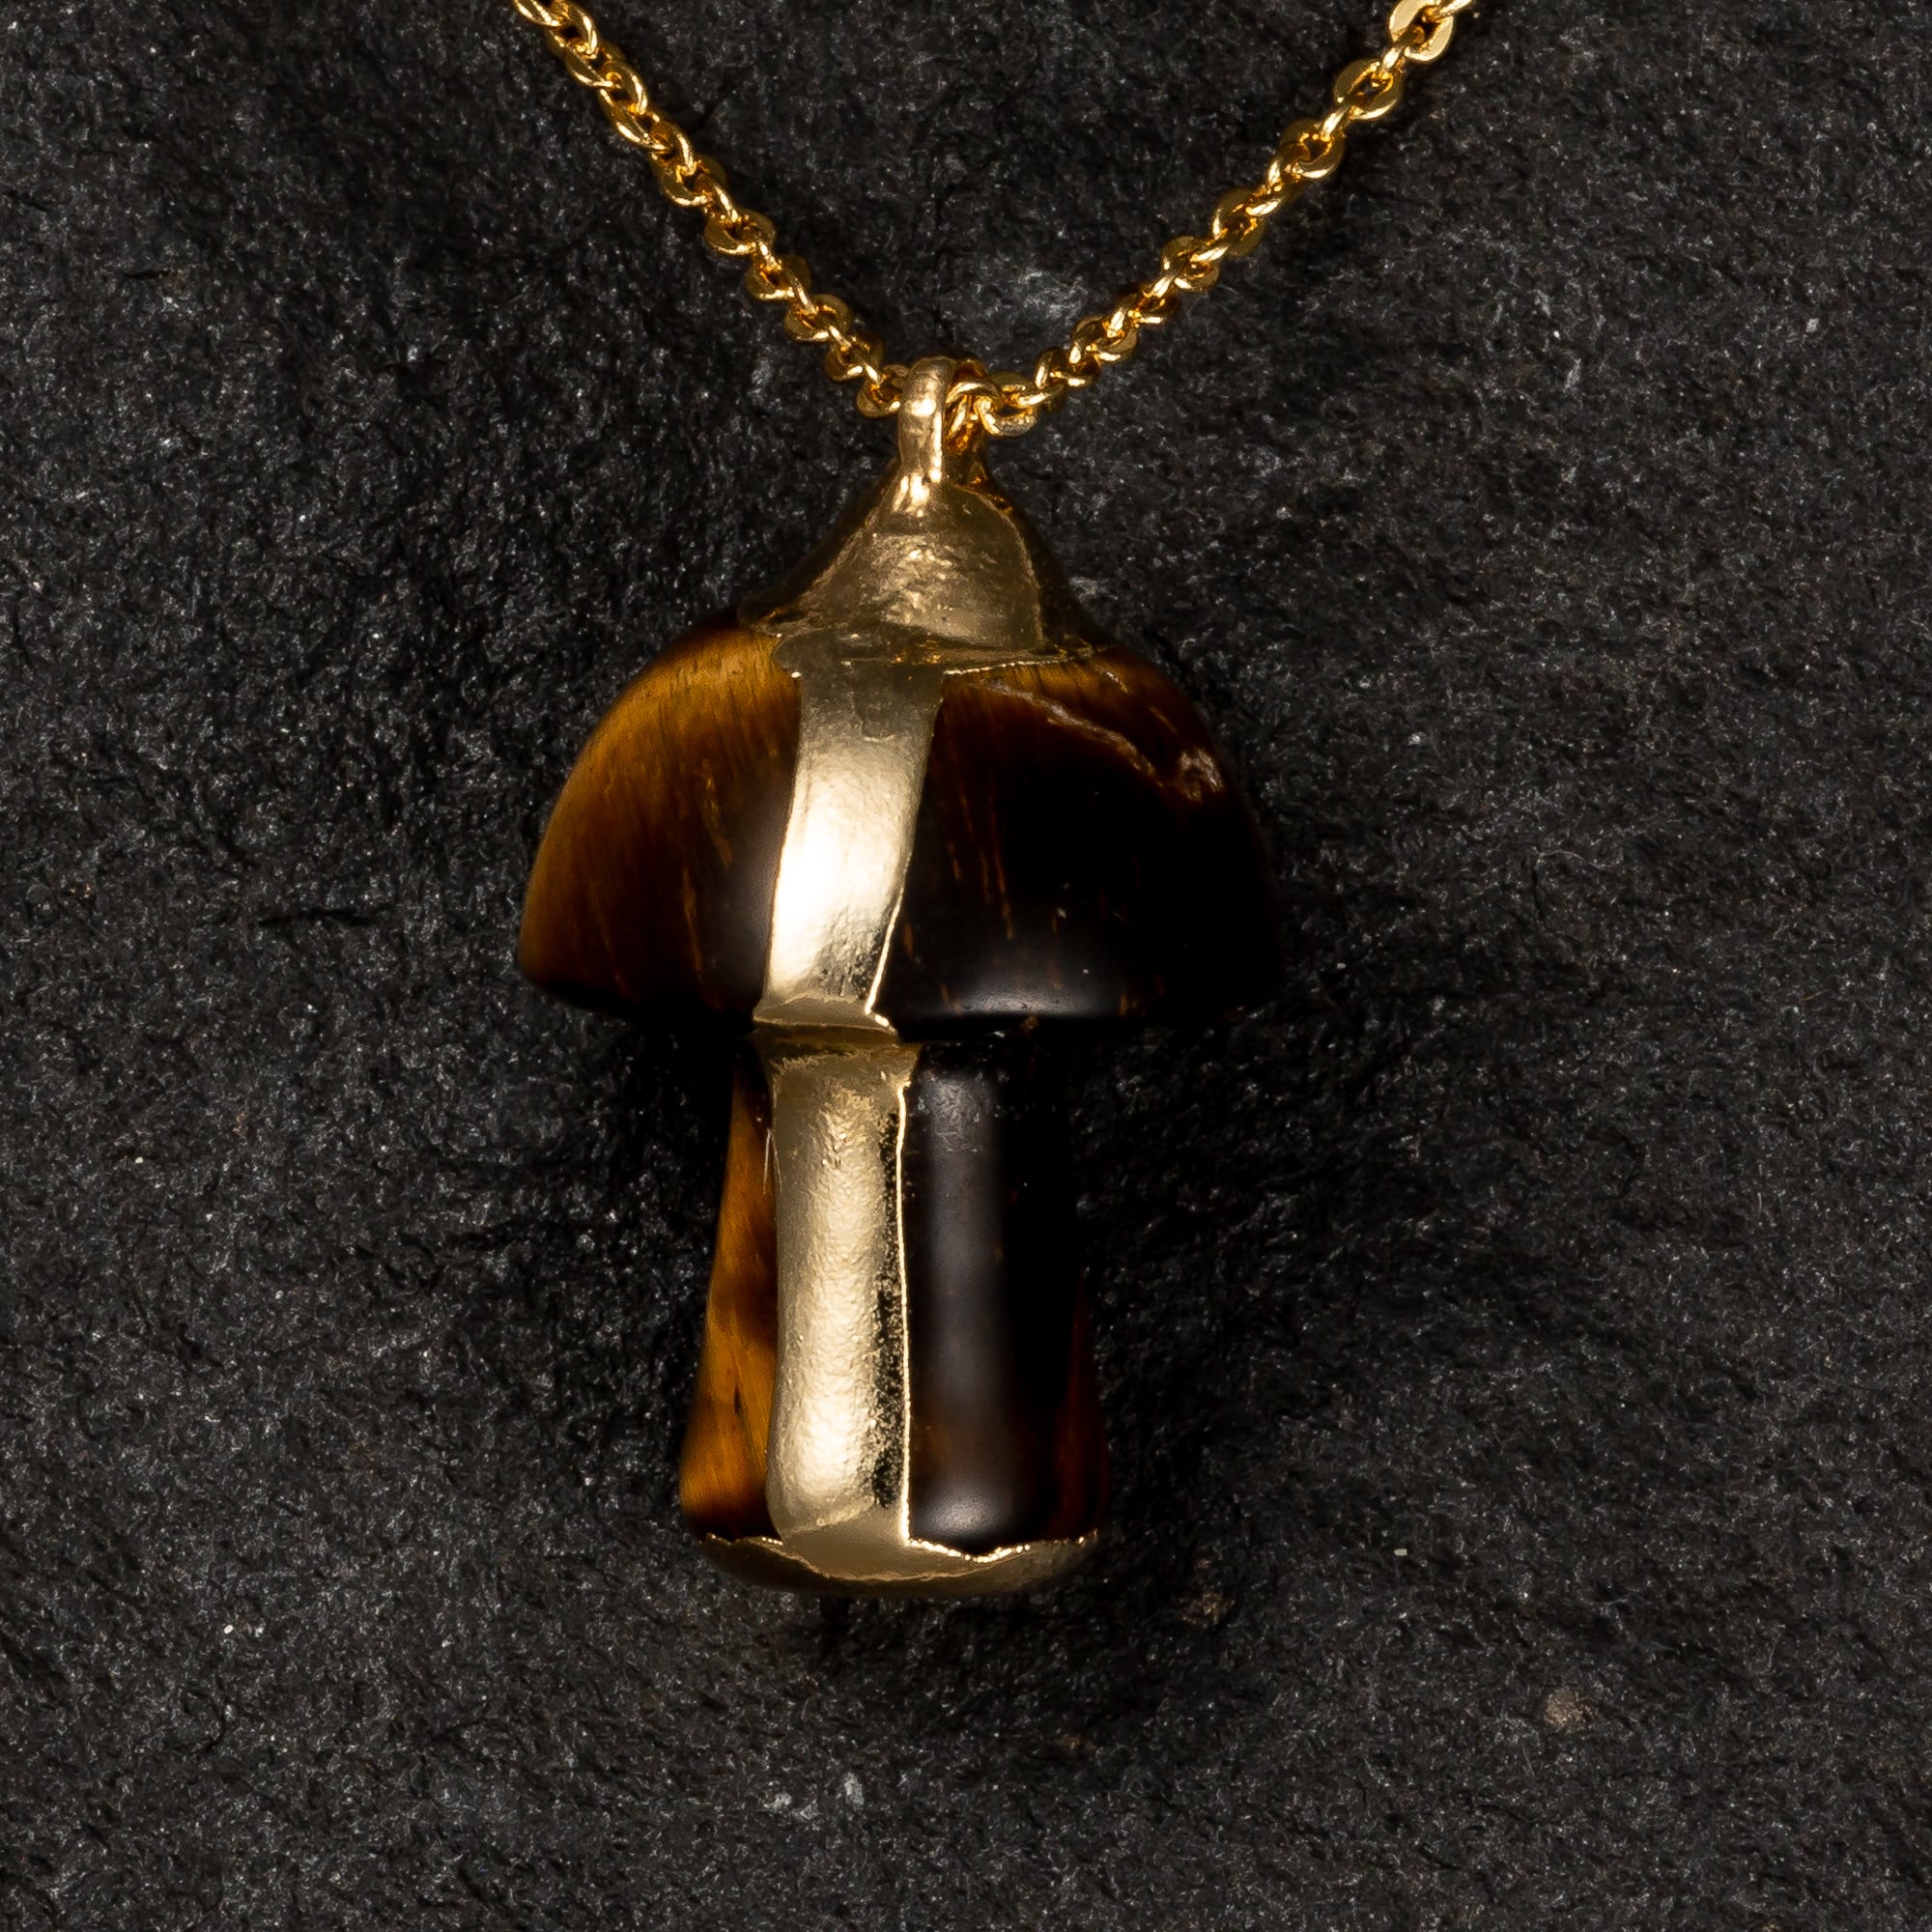 The Magical Mushroom Necklace (24k Gold Plated) - Necklaces